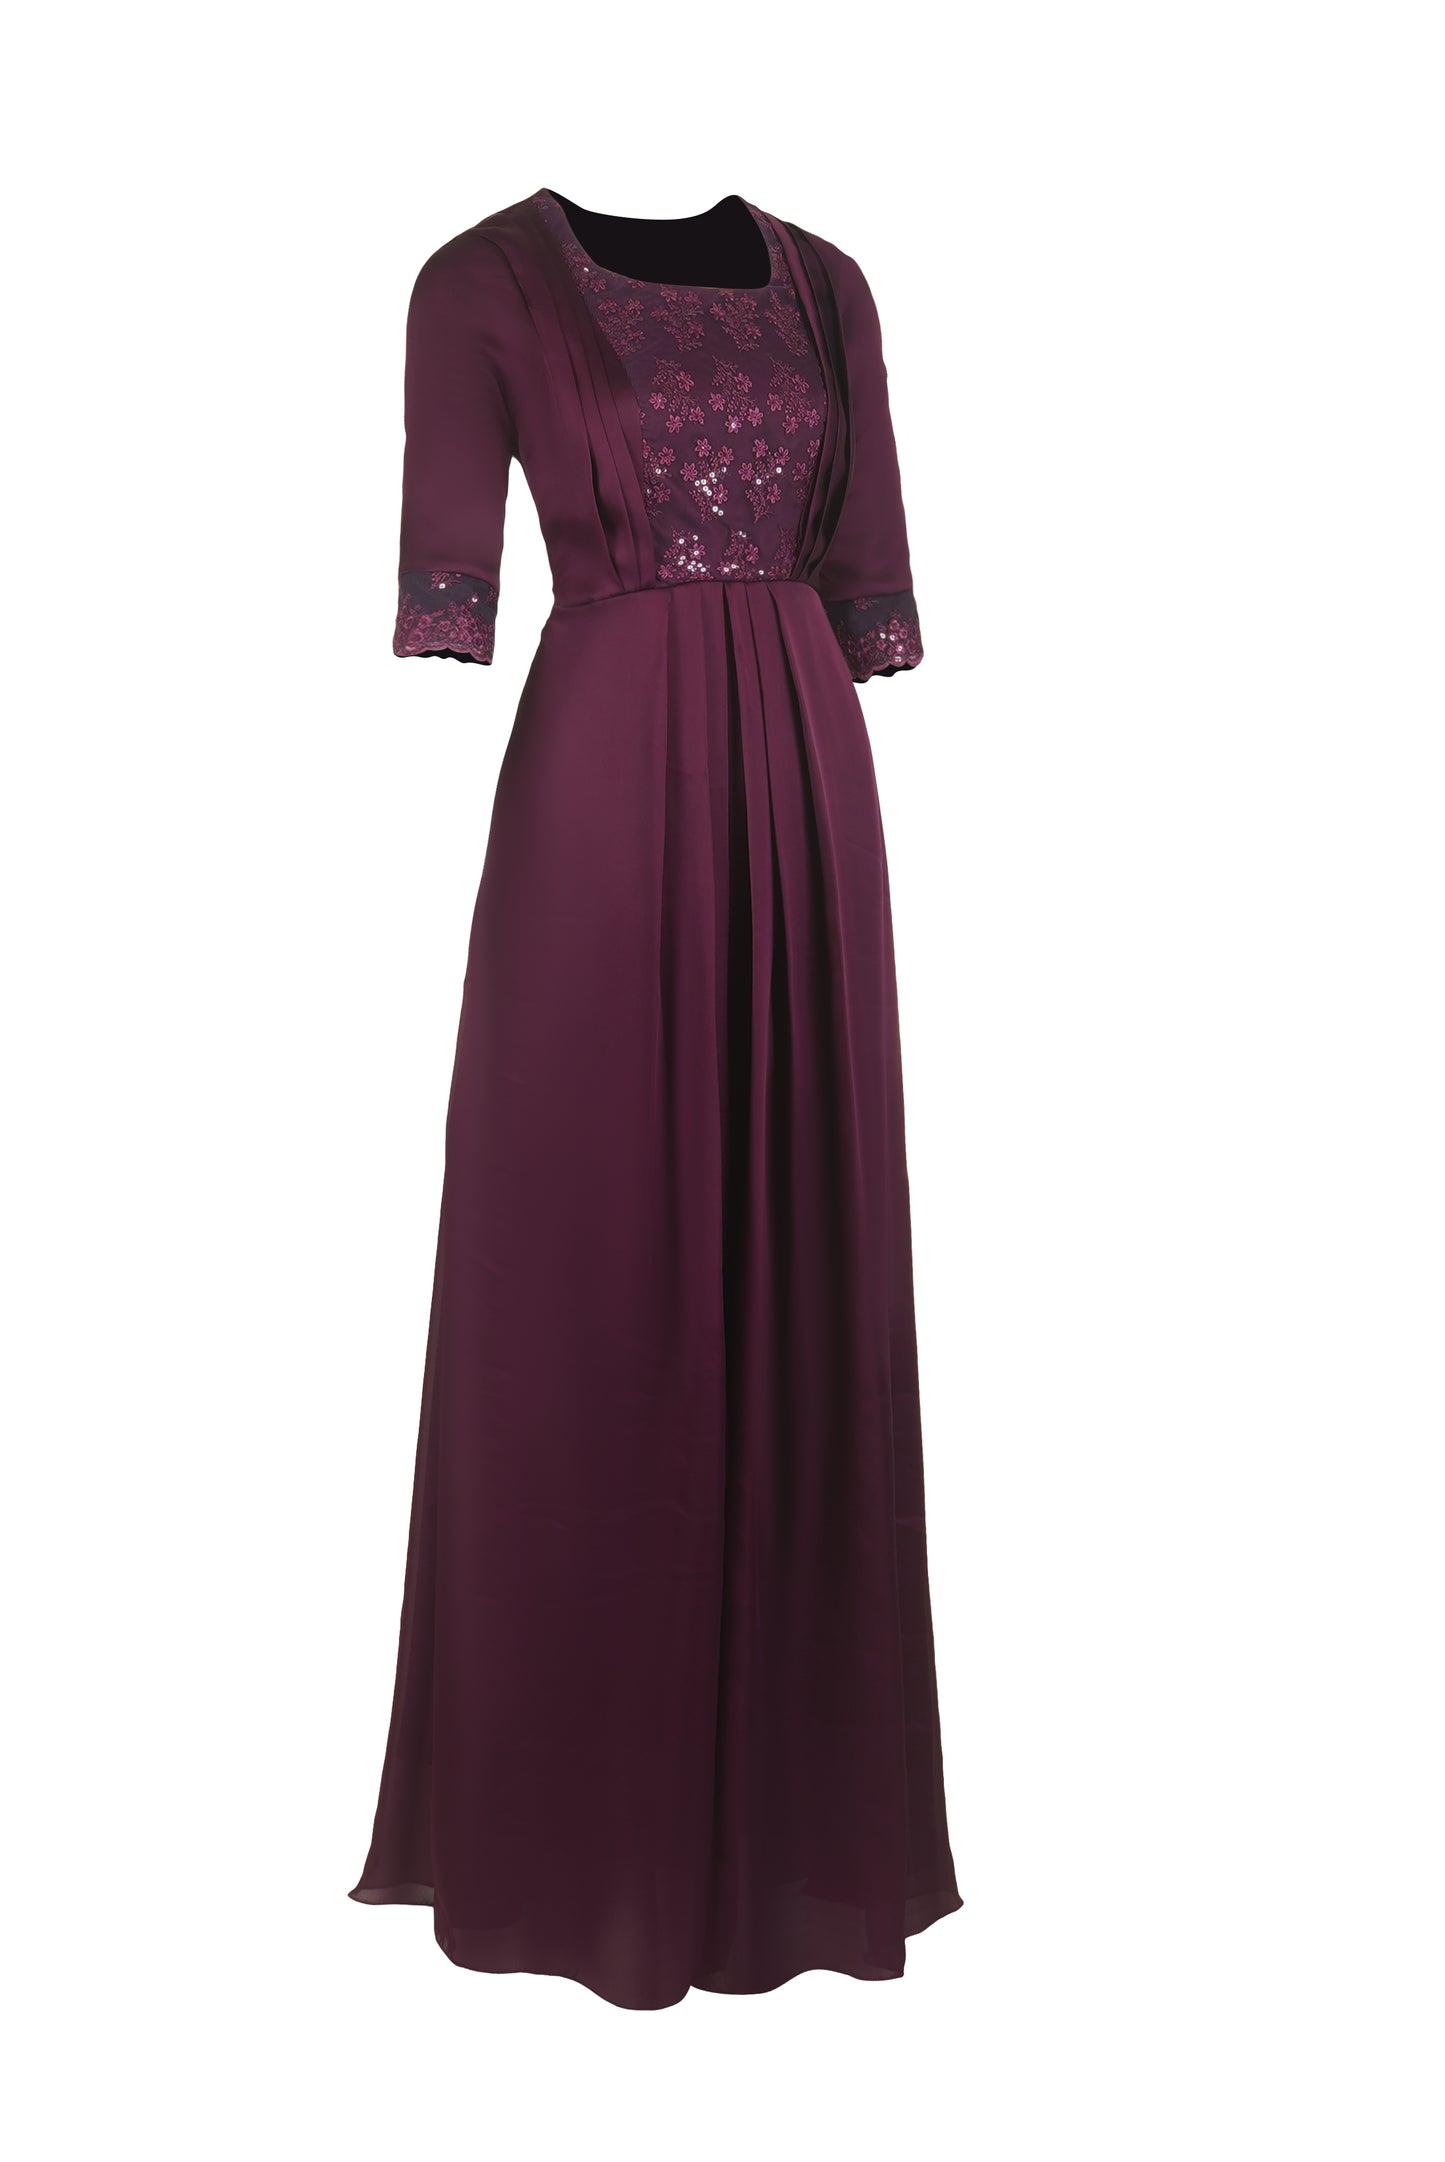 ZIA026 violet Full Length Gown with Netted Yoke